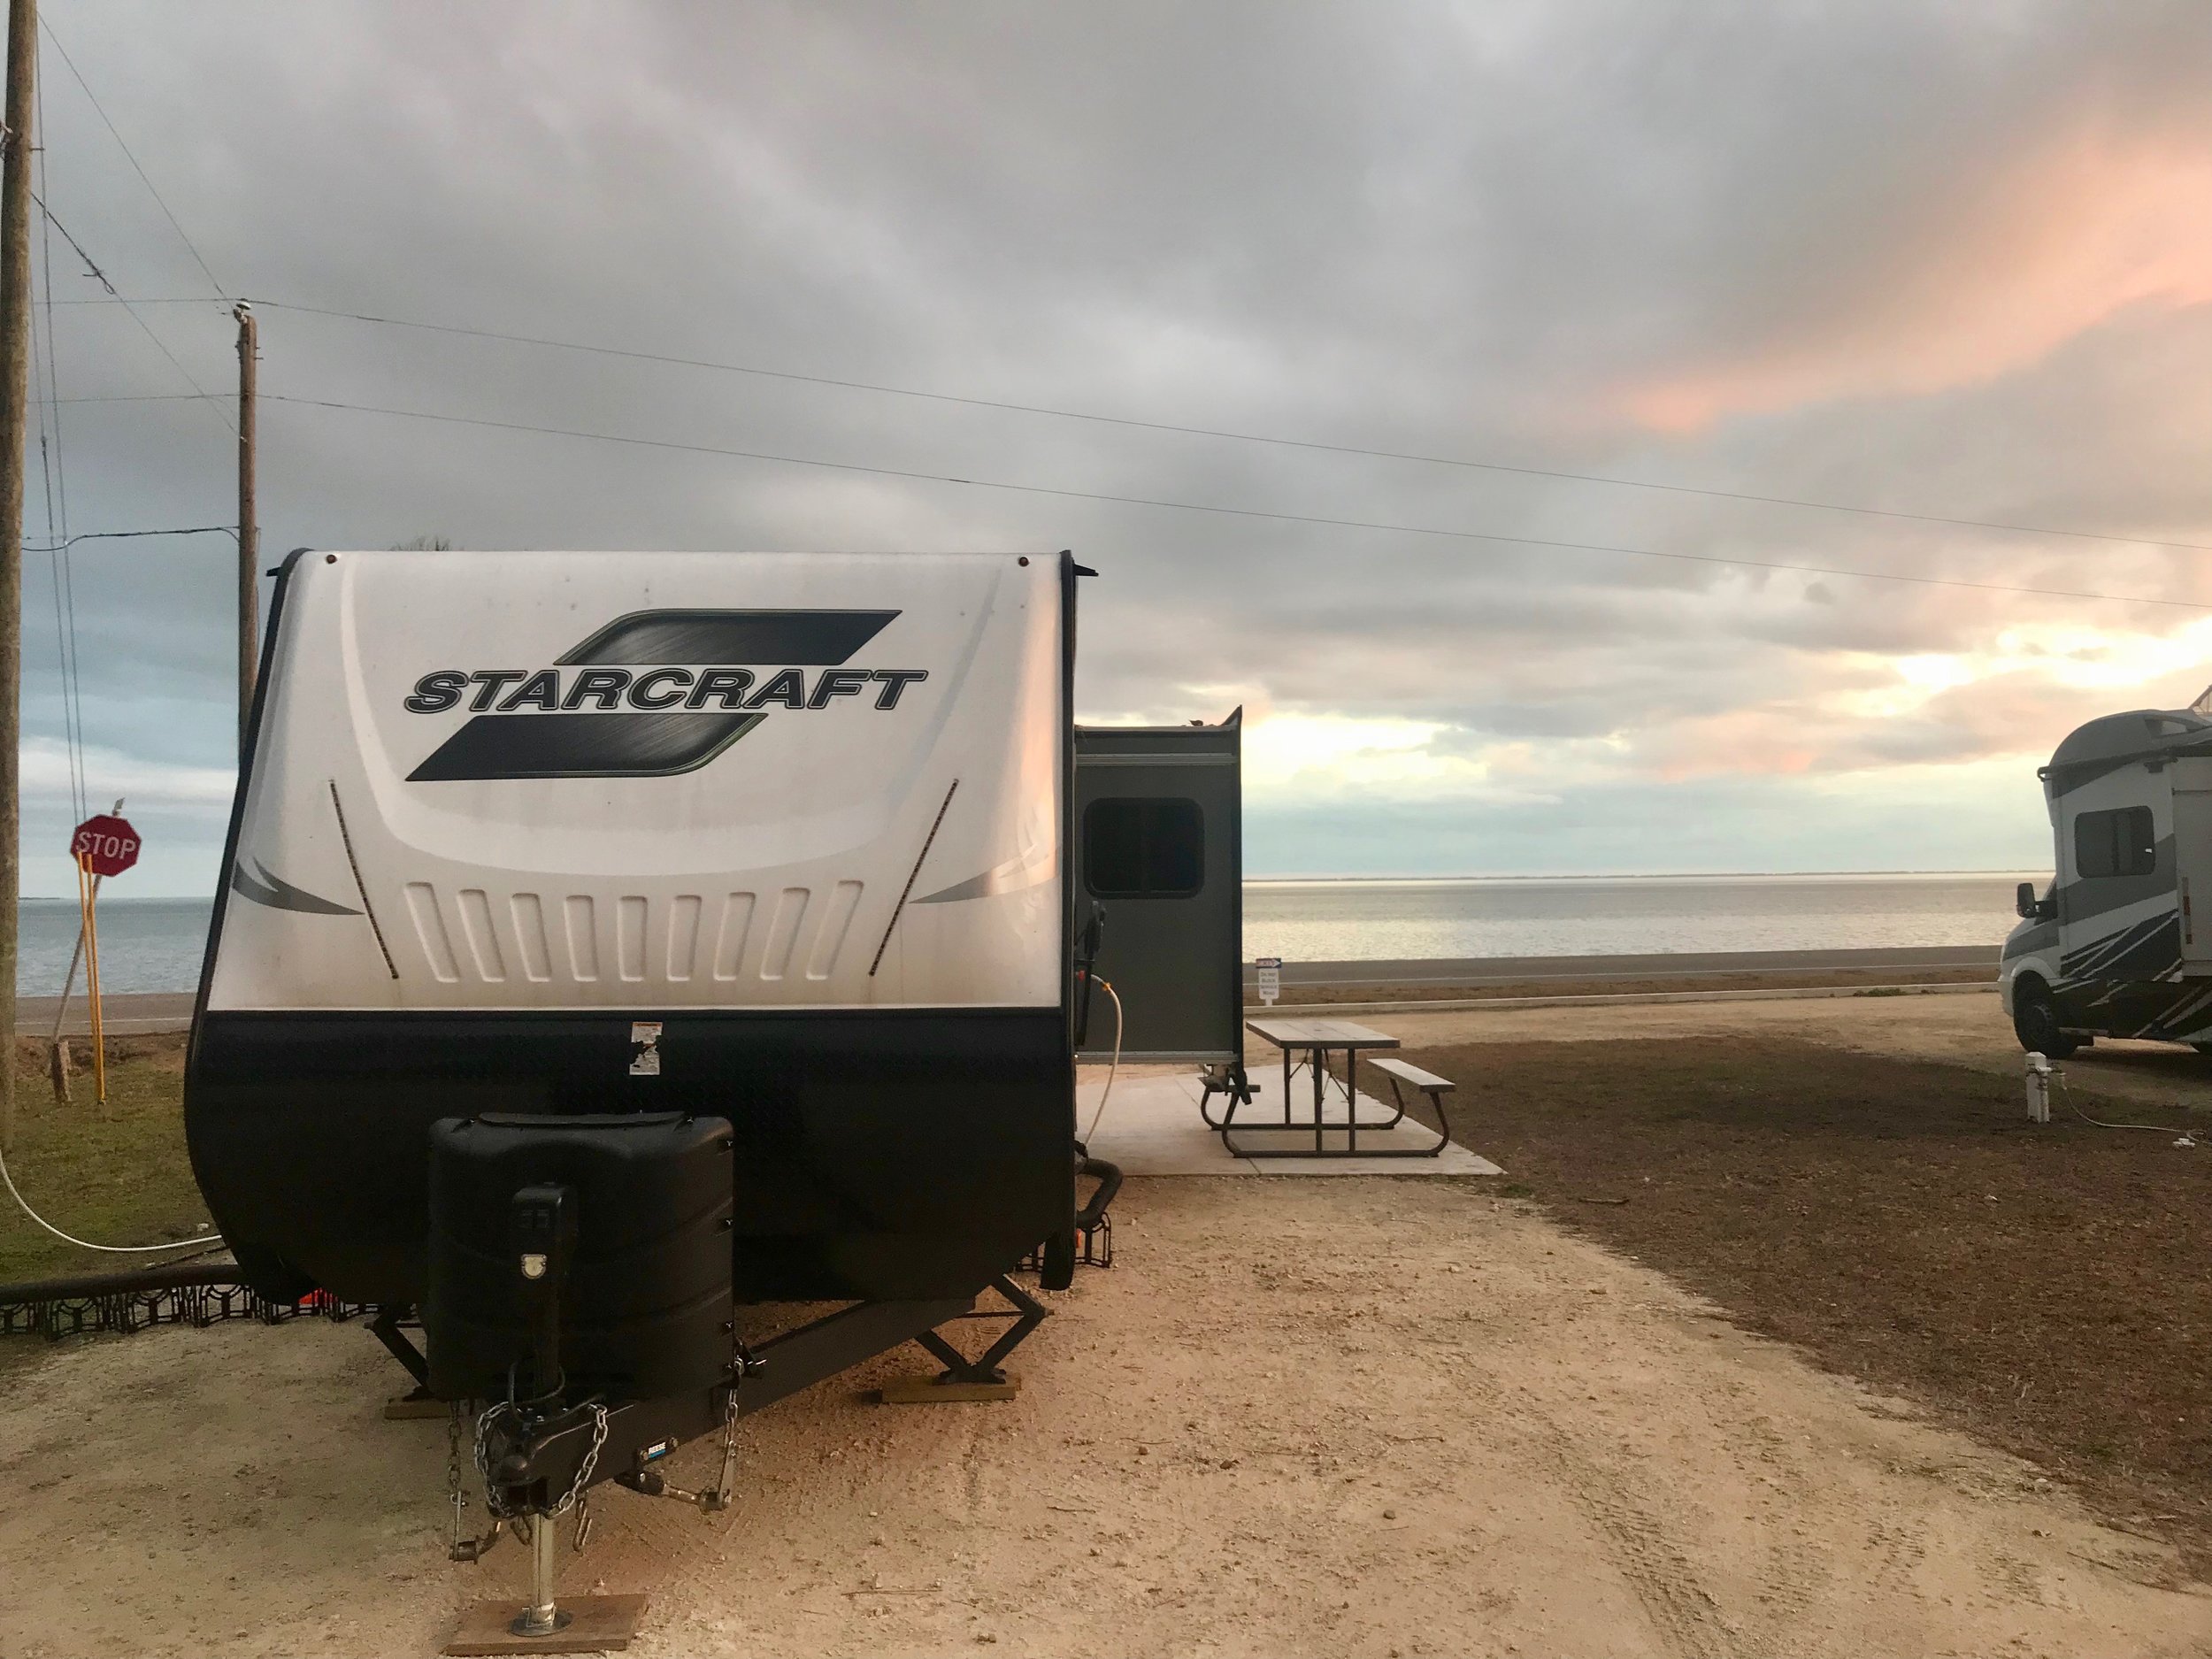  The writer's trailer, parked at a campground on the Gulf of Mexico on the Florida Panhandle.     